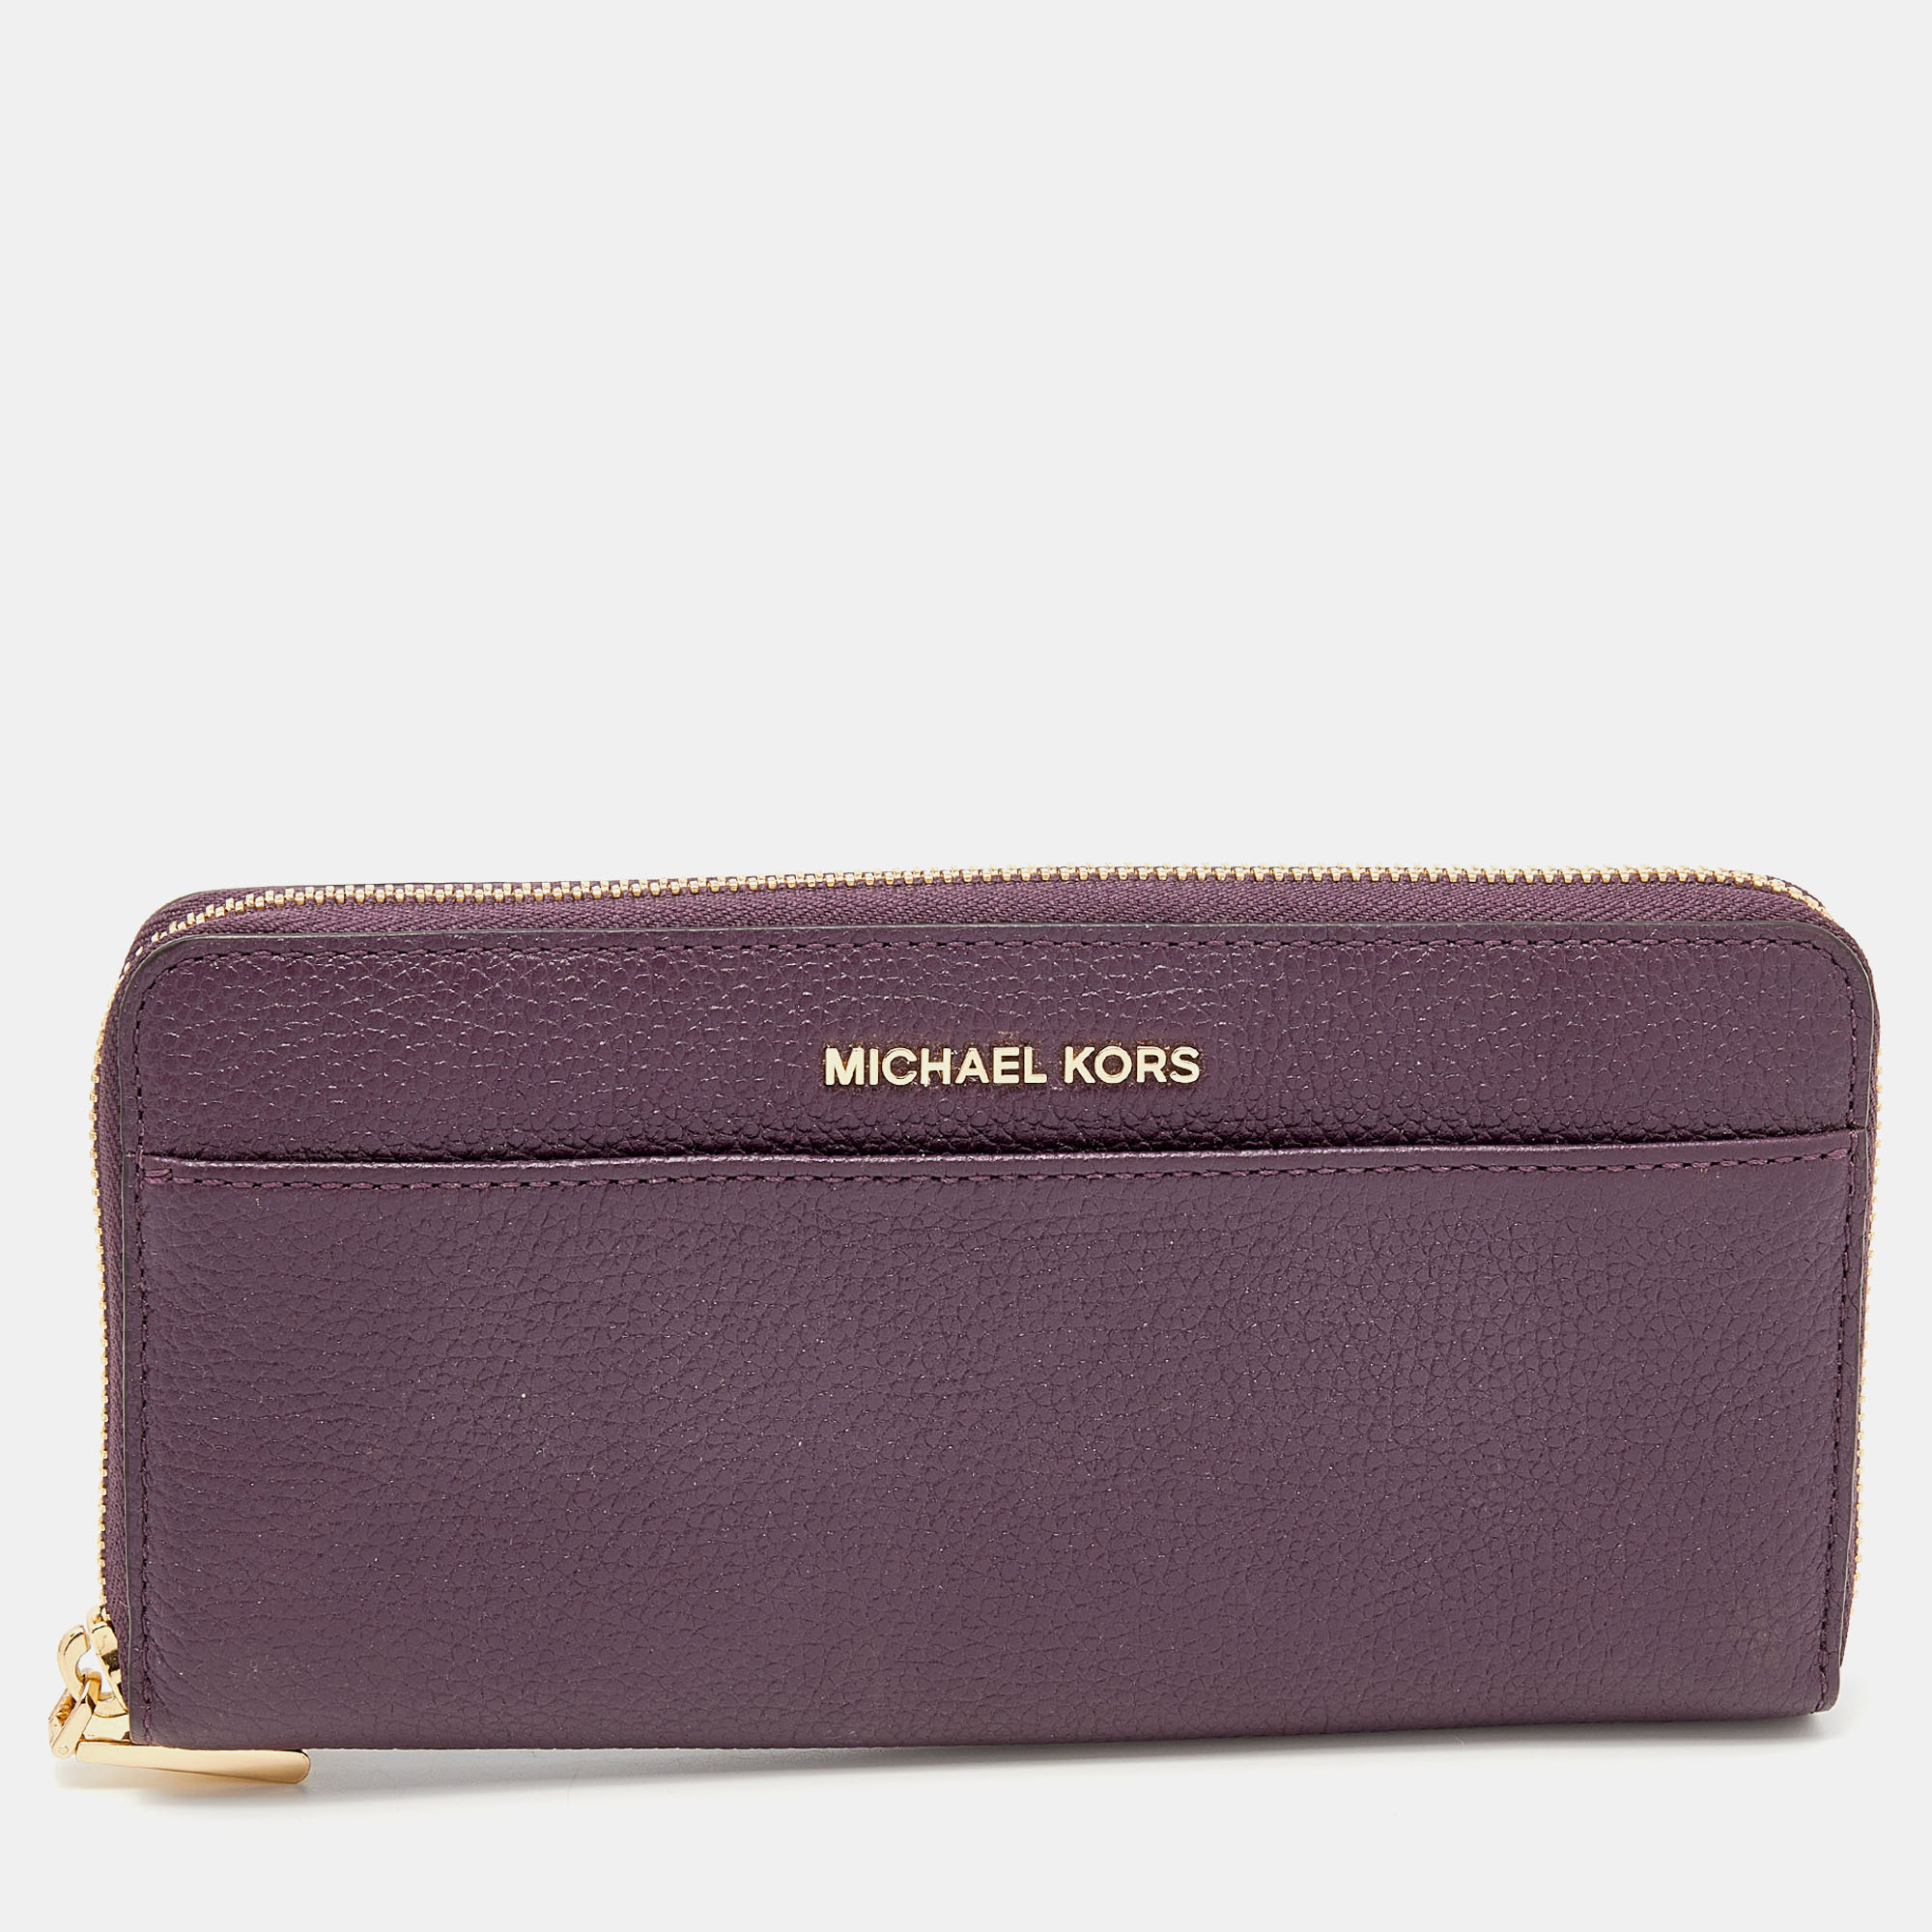 This Michael Kors wallet is an immaculate balance of sophistication and rational utility. It has been designed using prime quality materials and is elevated by a sleek finish. The creation is equipped with ample space for your monetary essentials.